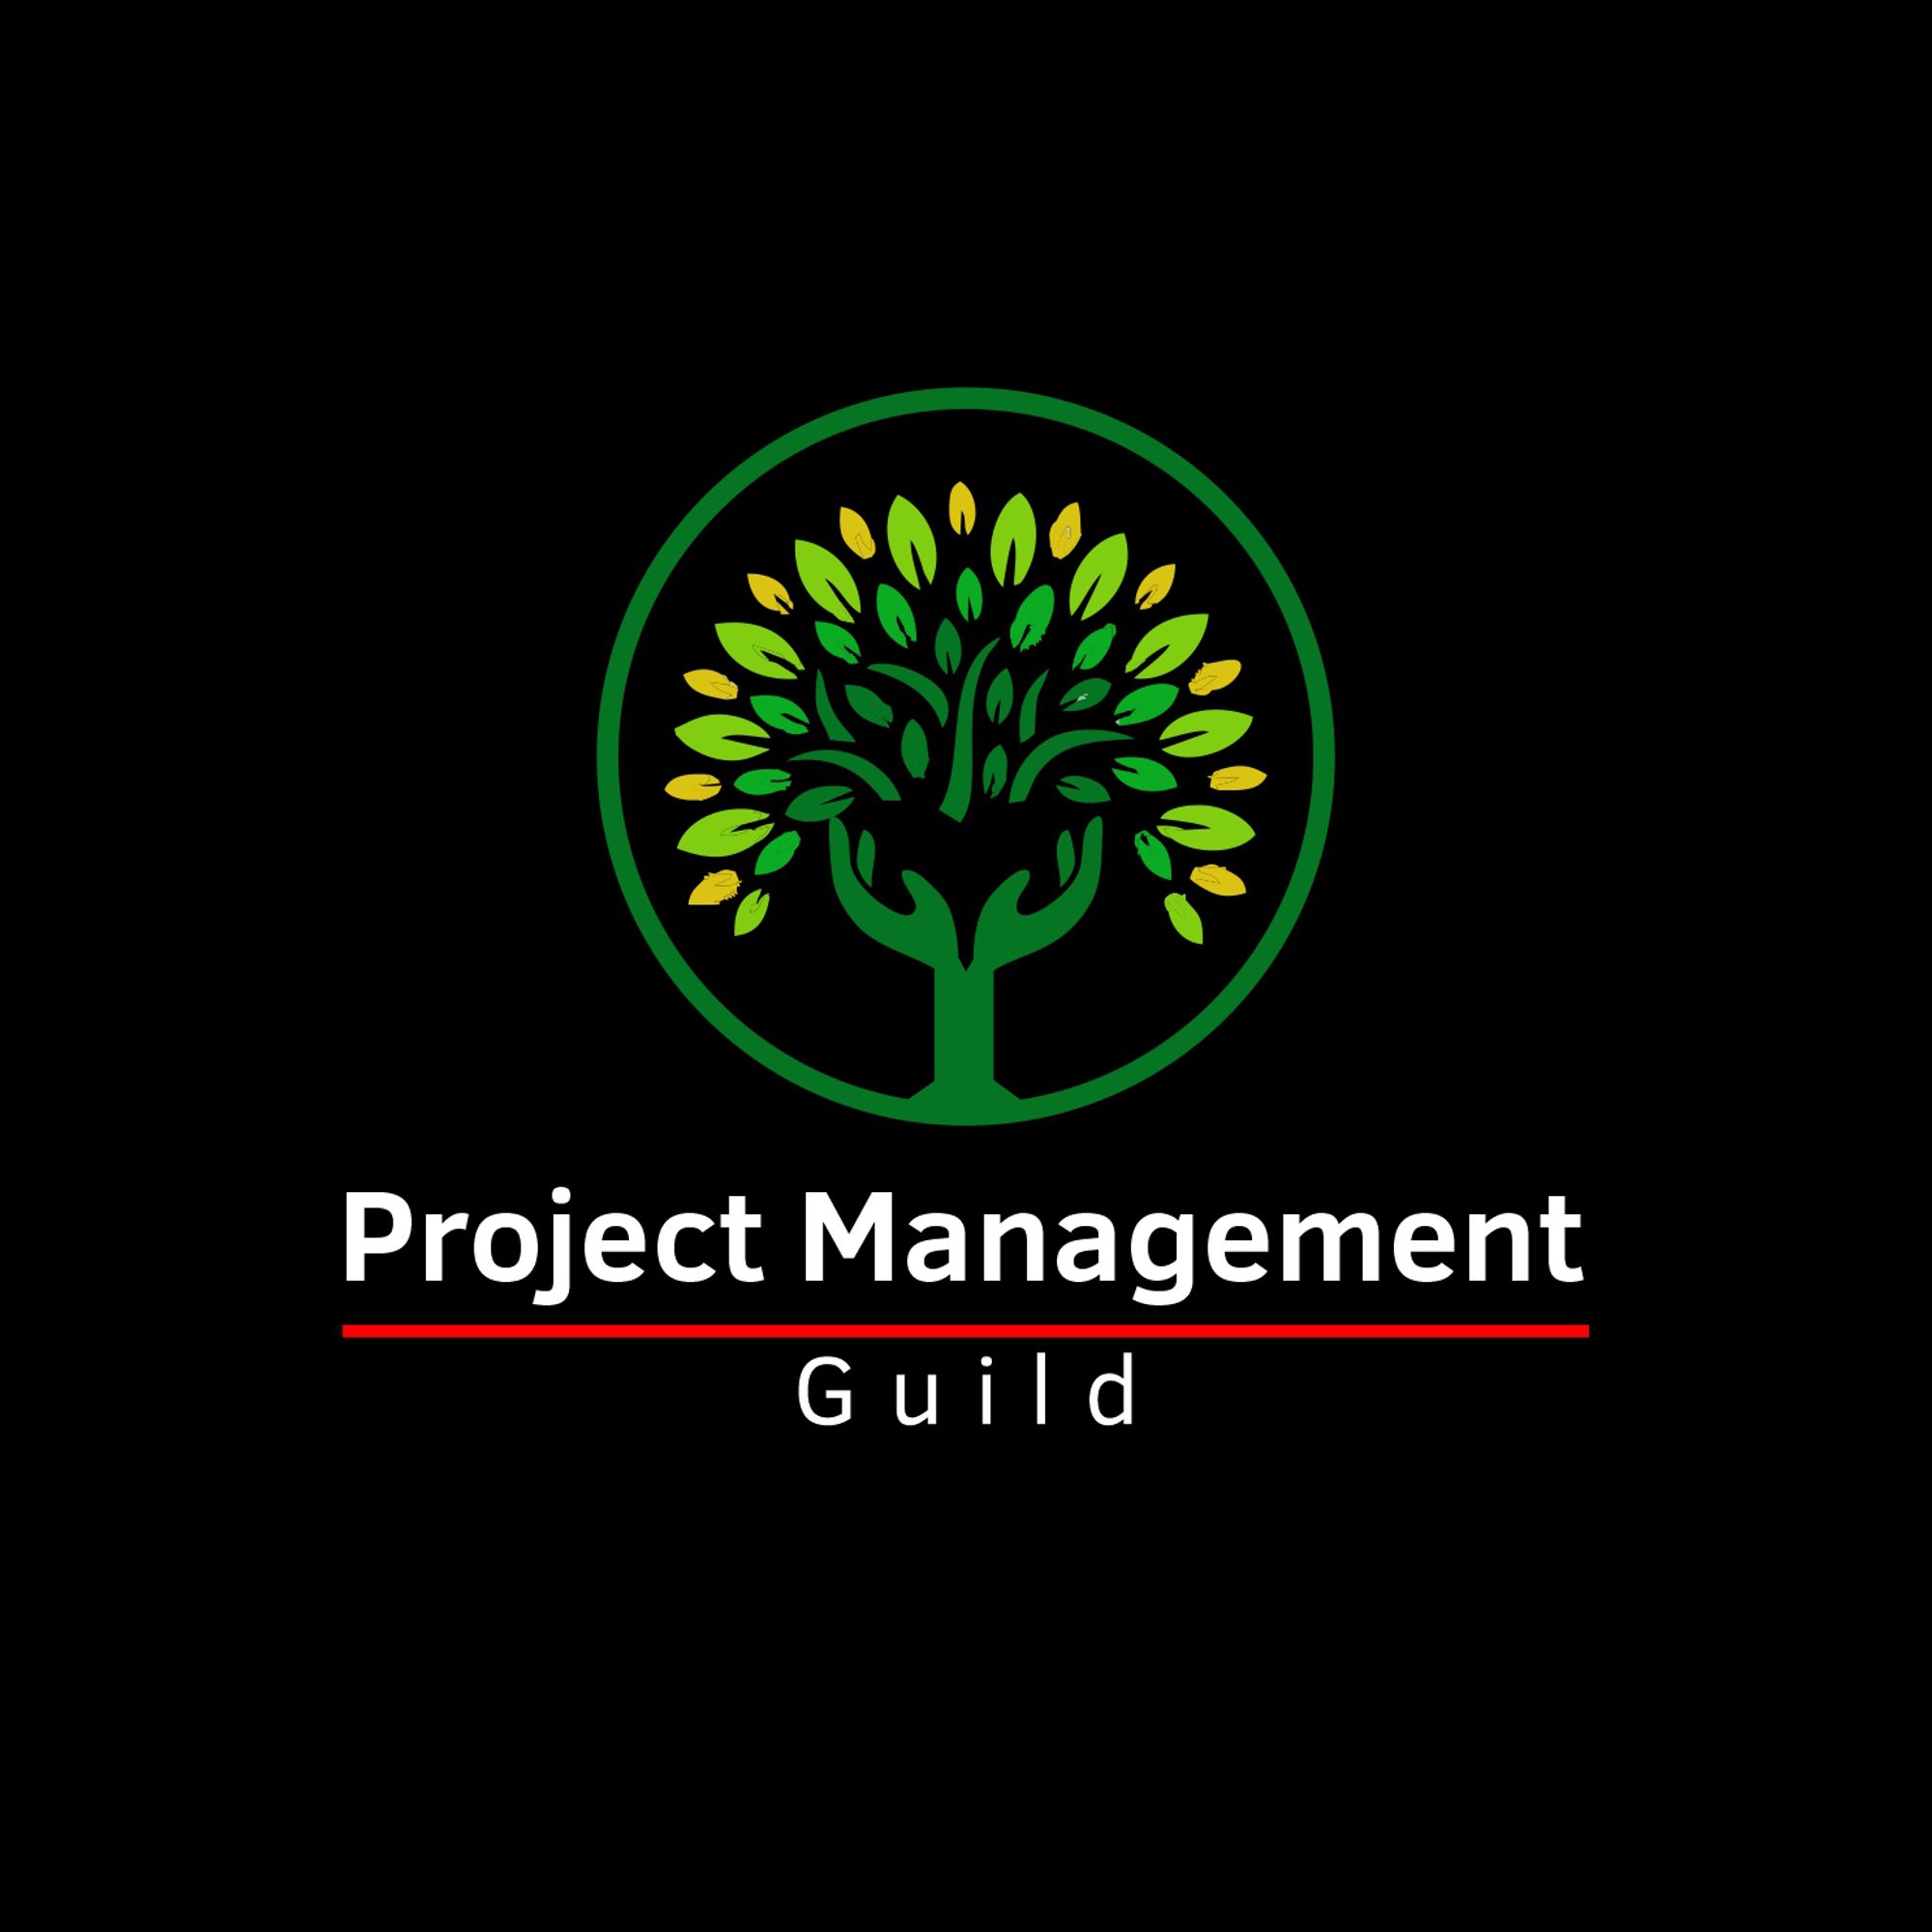 Guilda Projects  Photos, videos, logos, illustrations and